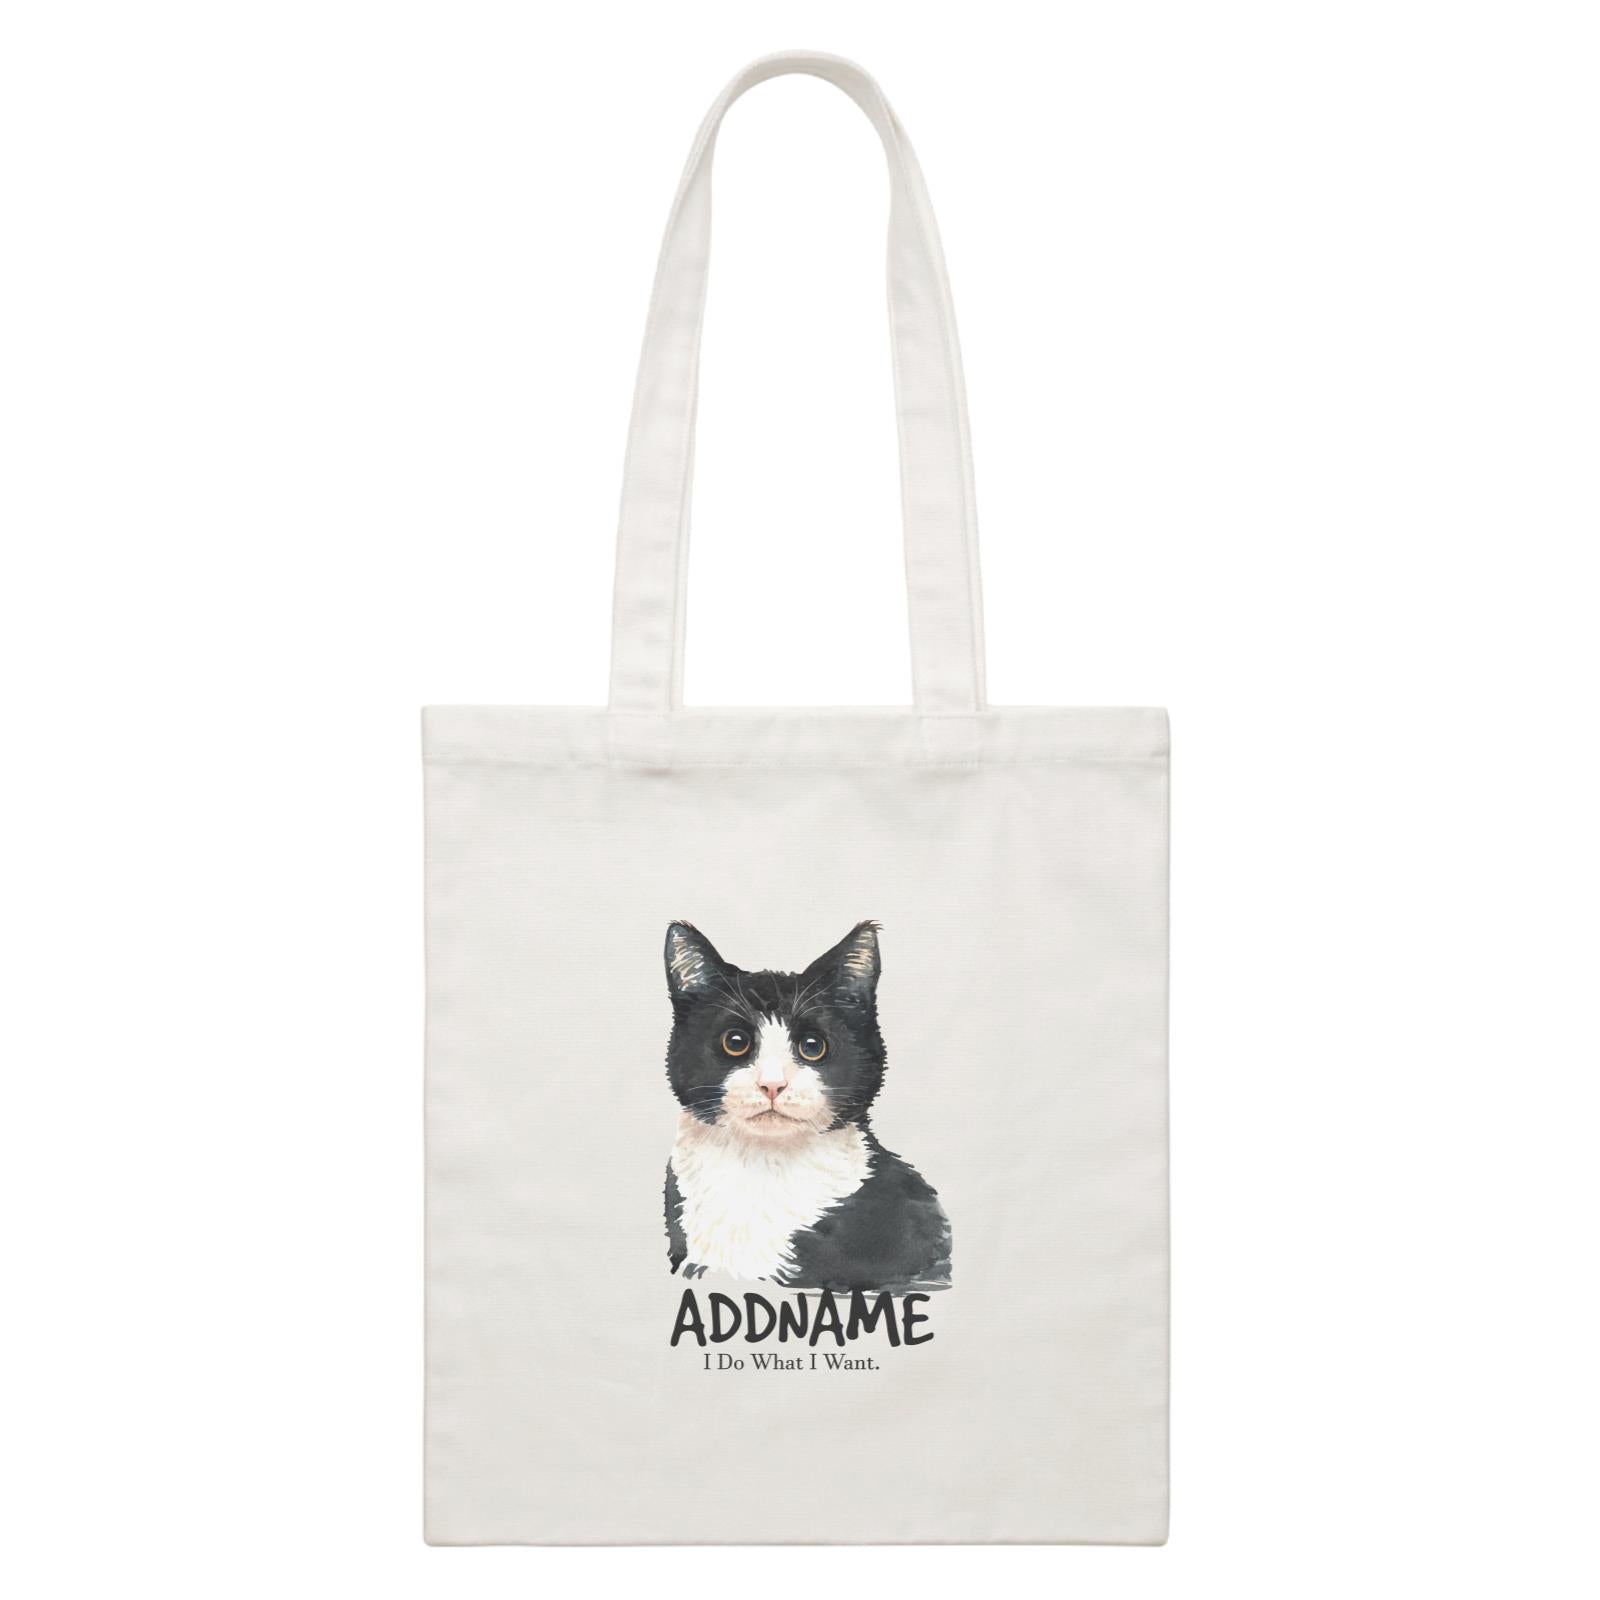 Watercolor Cat Black & White Cat I Do What I Want Addname White Canvas Bag